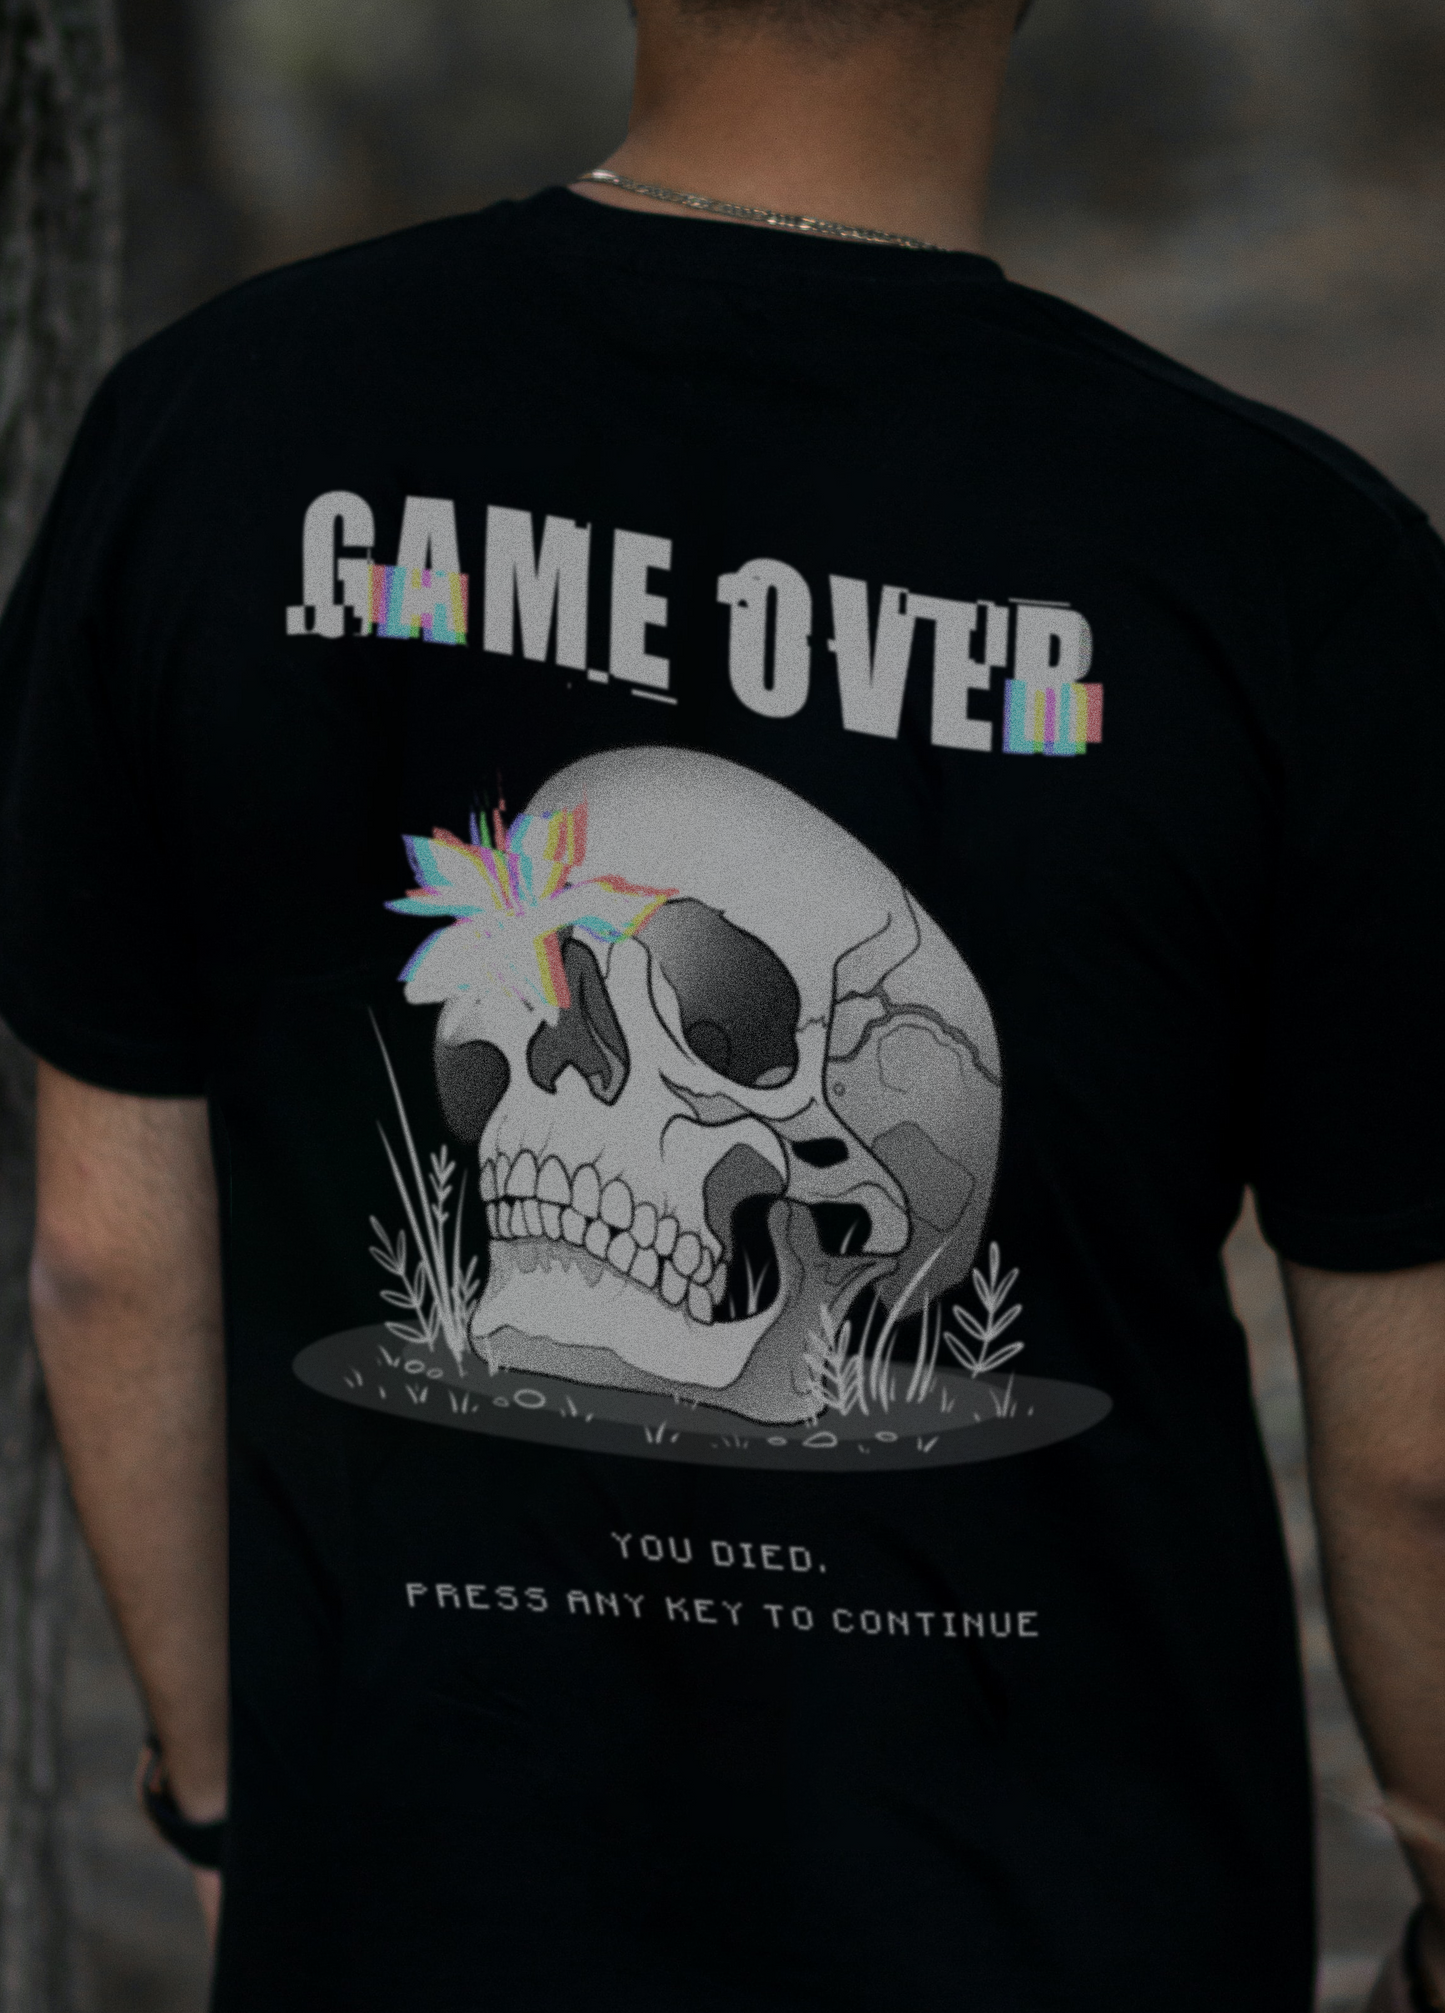 GAME OVER T-shirt